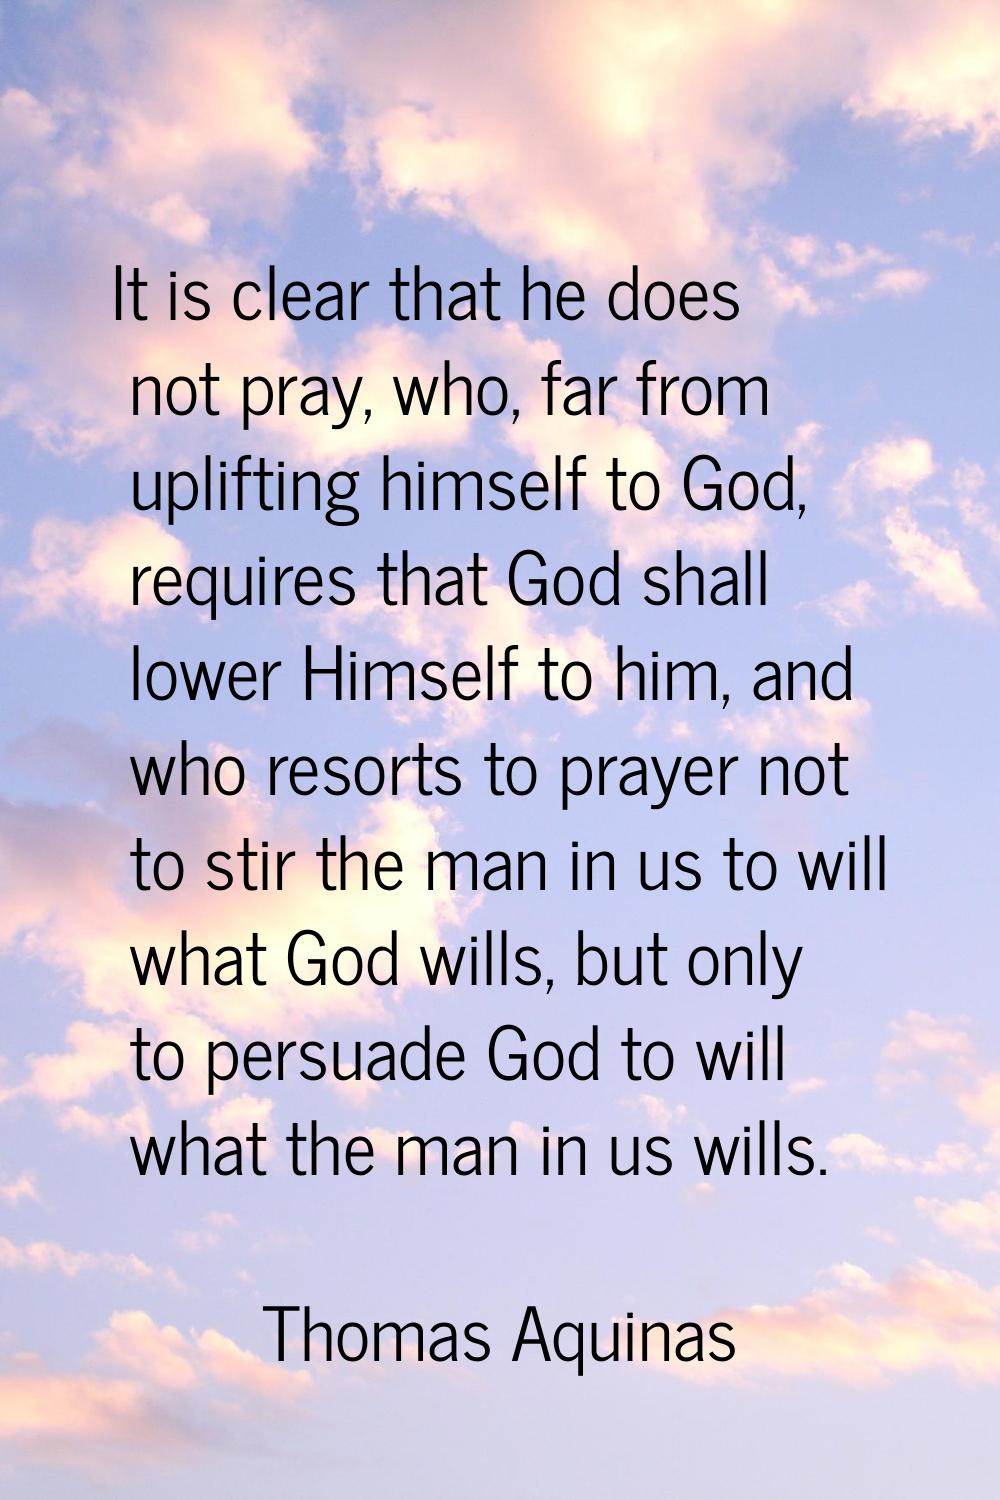 It is clear that he does not pray, who, far from uplifting himself to God, requires that God shall 